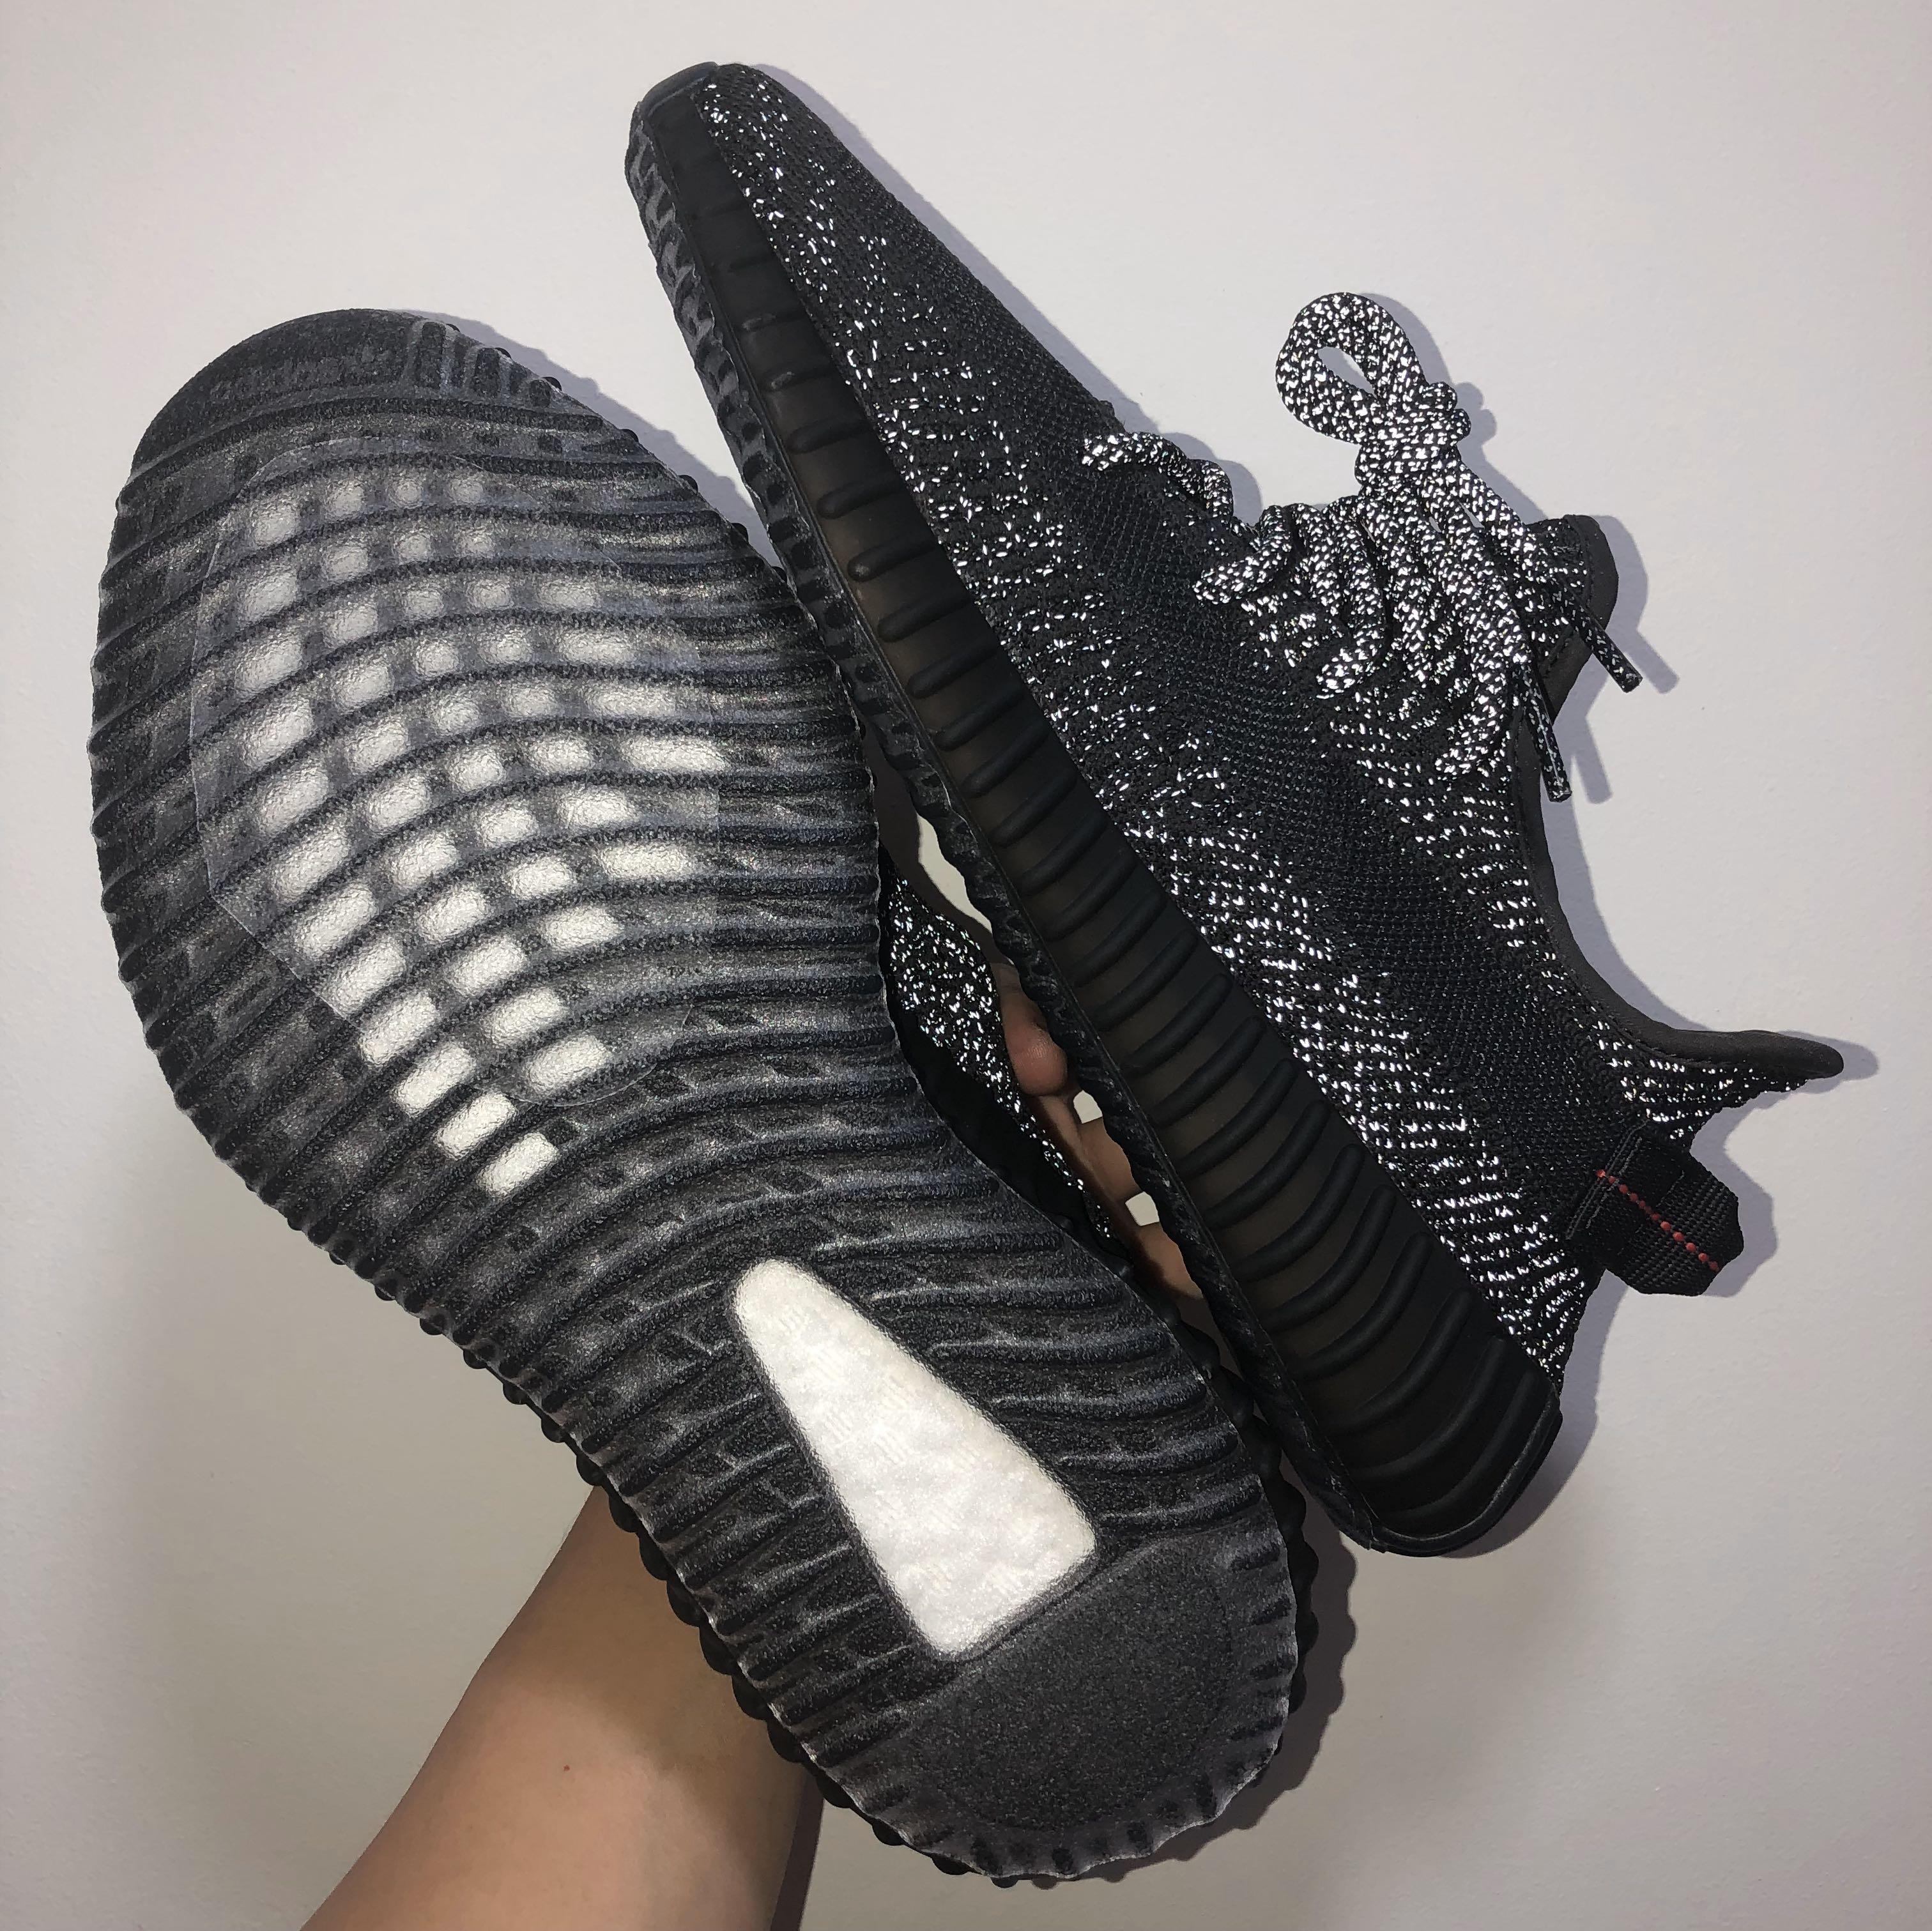 sole shield for yeezy